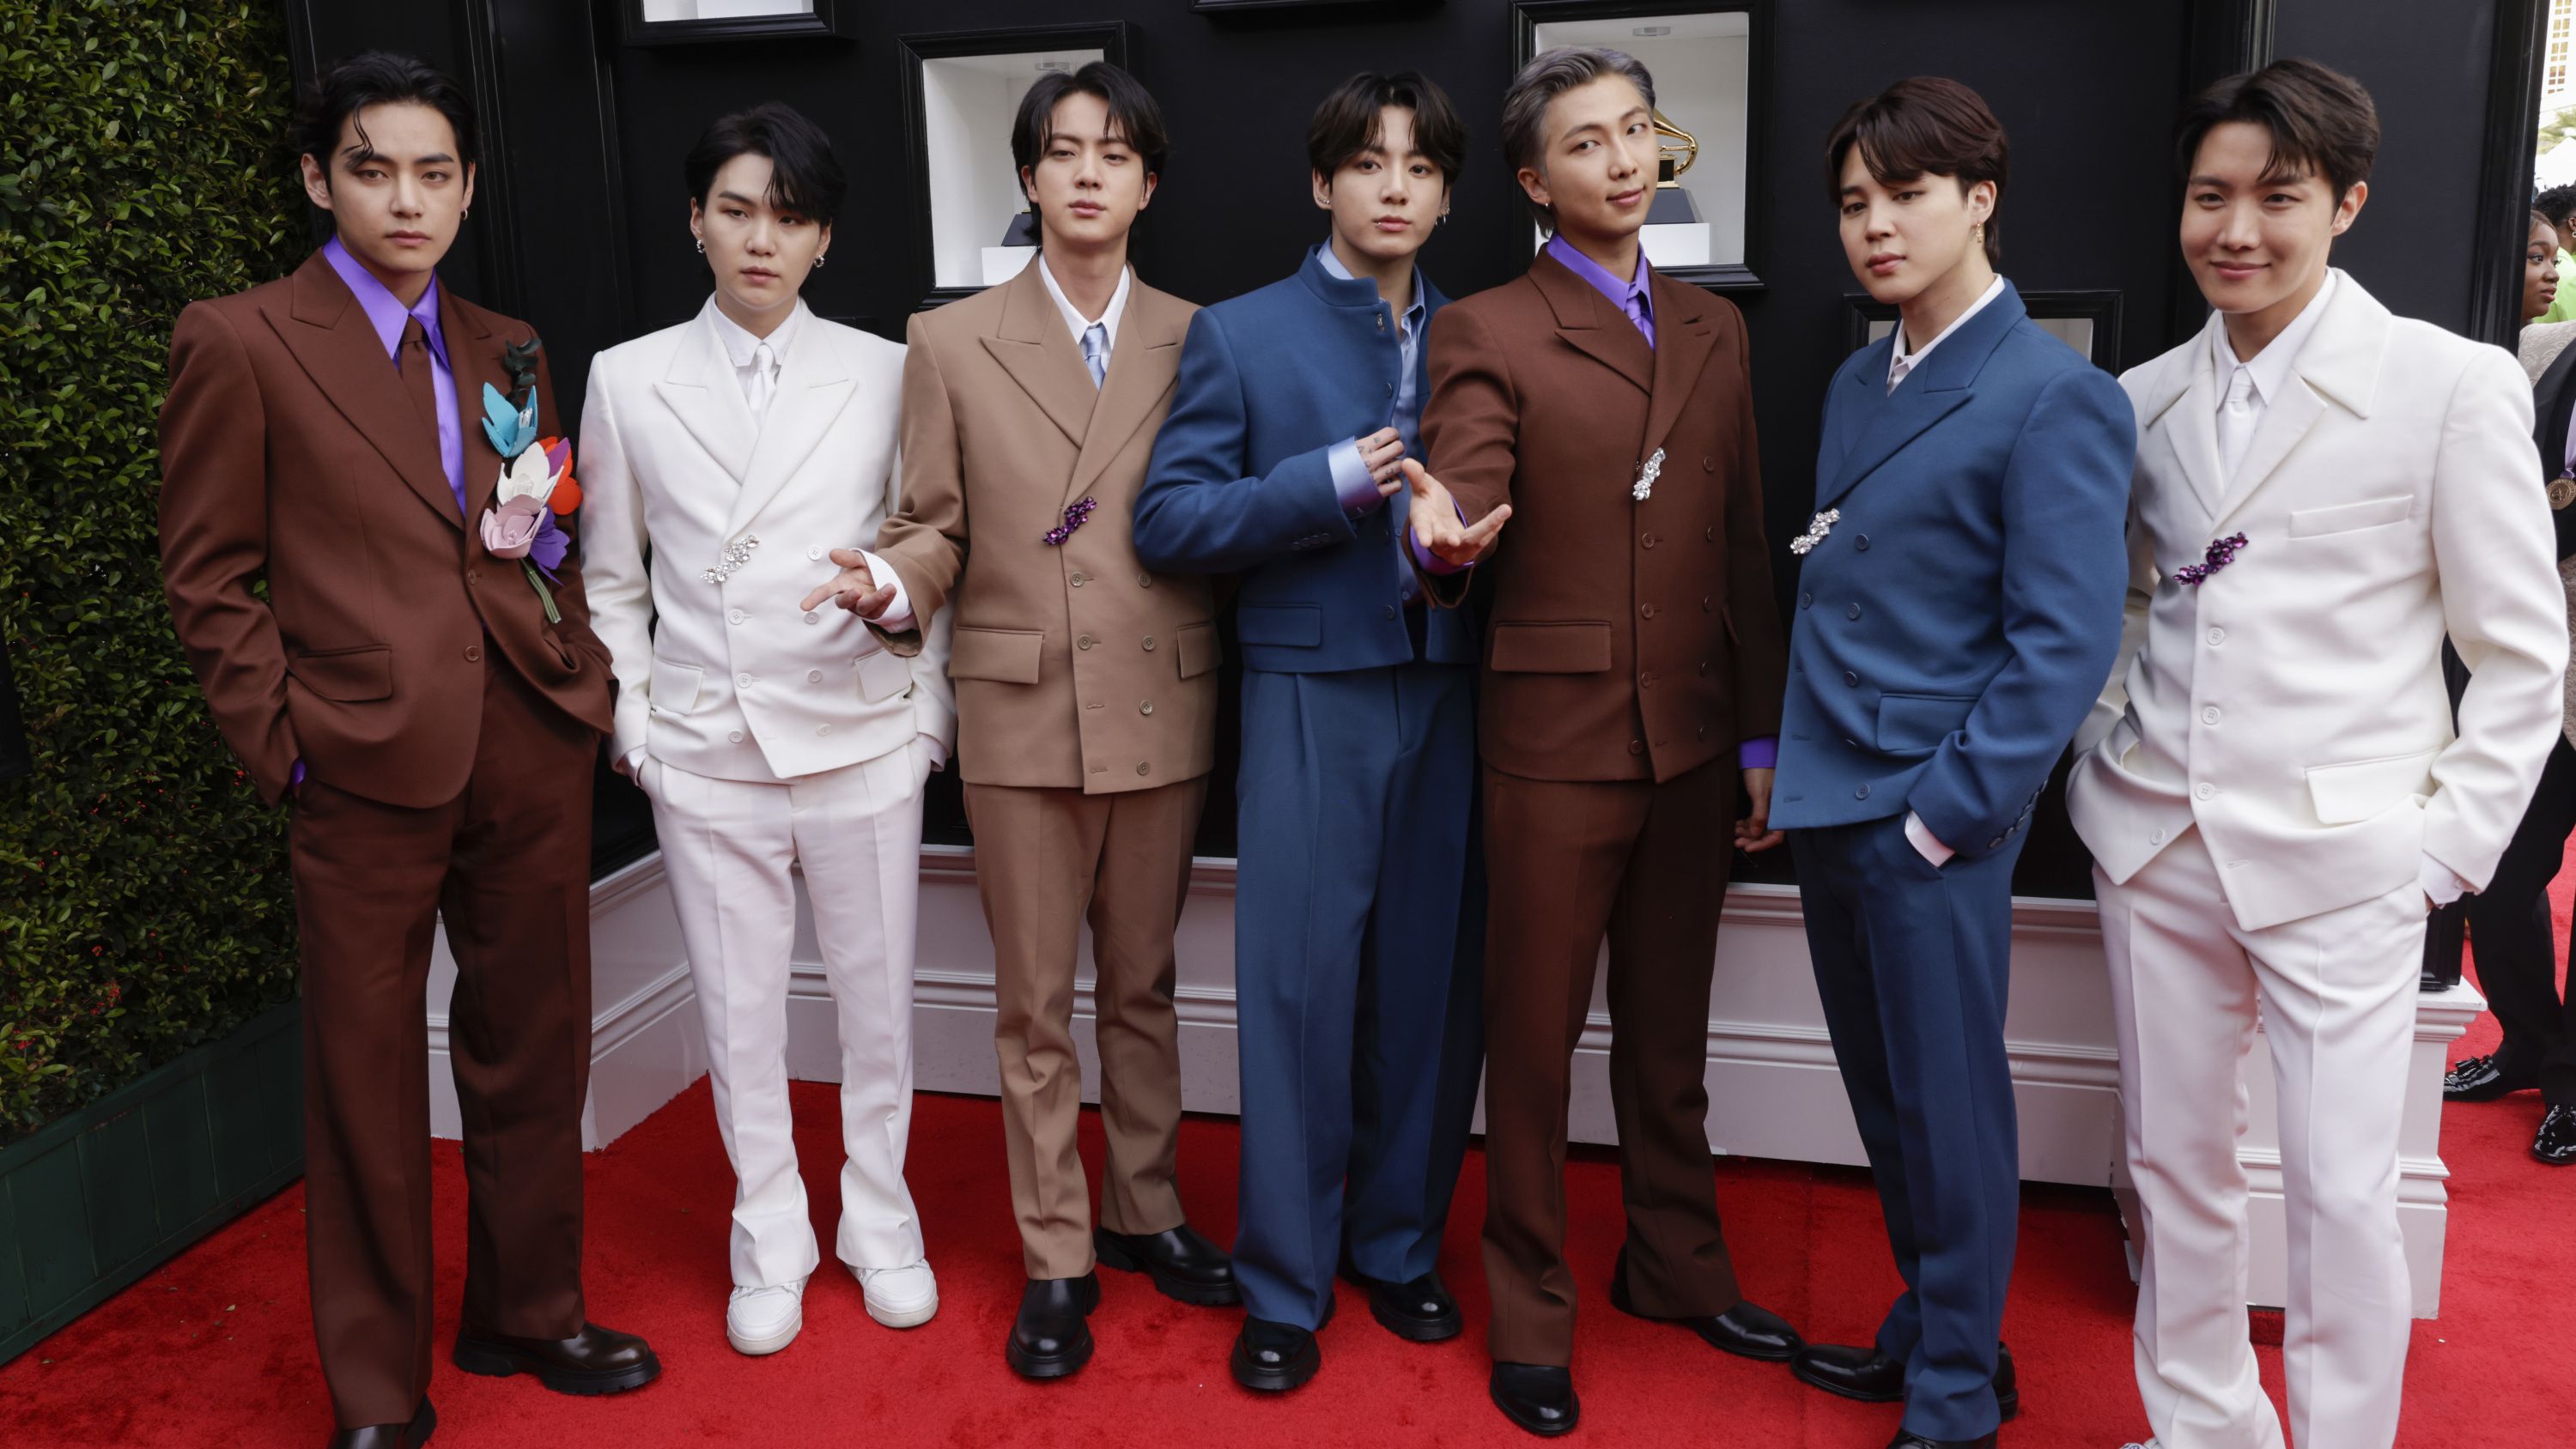 BTS' 'Yet To Come' nominated for Best Music Video at the 2023 GRAMMY